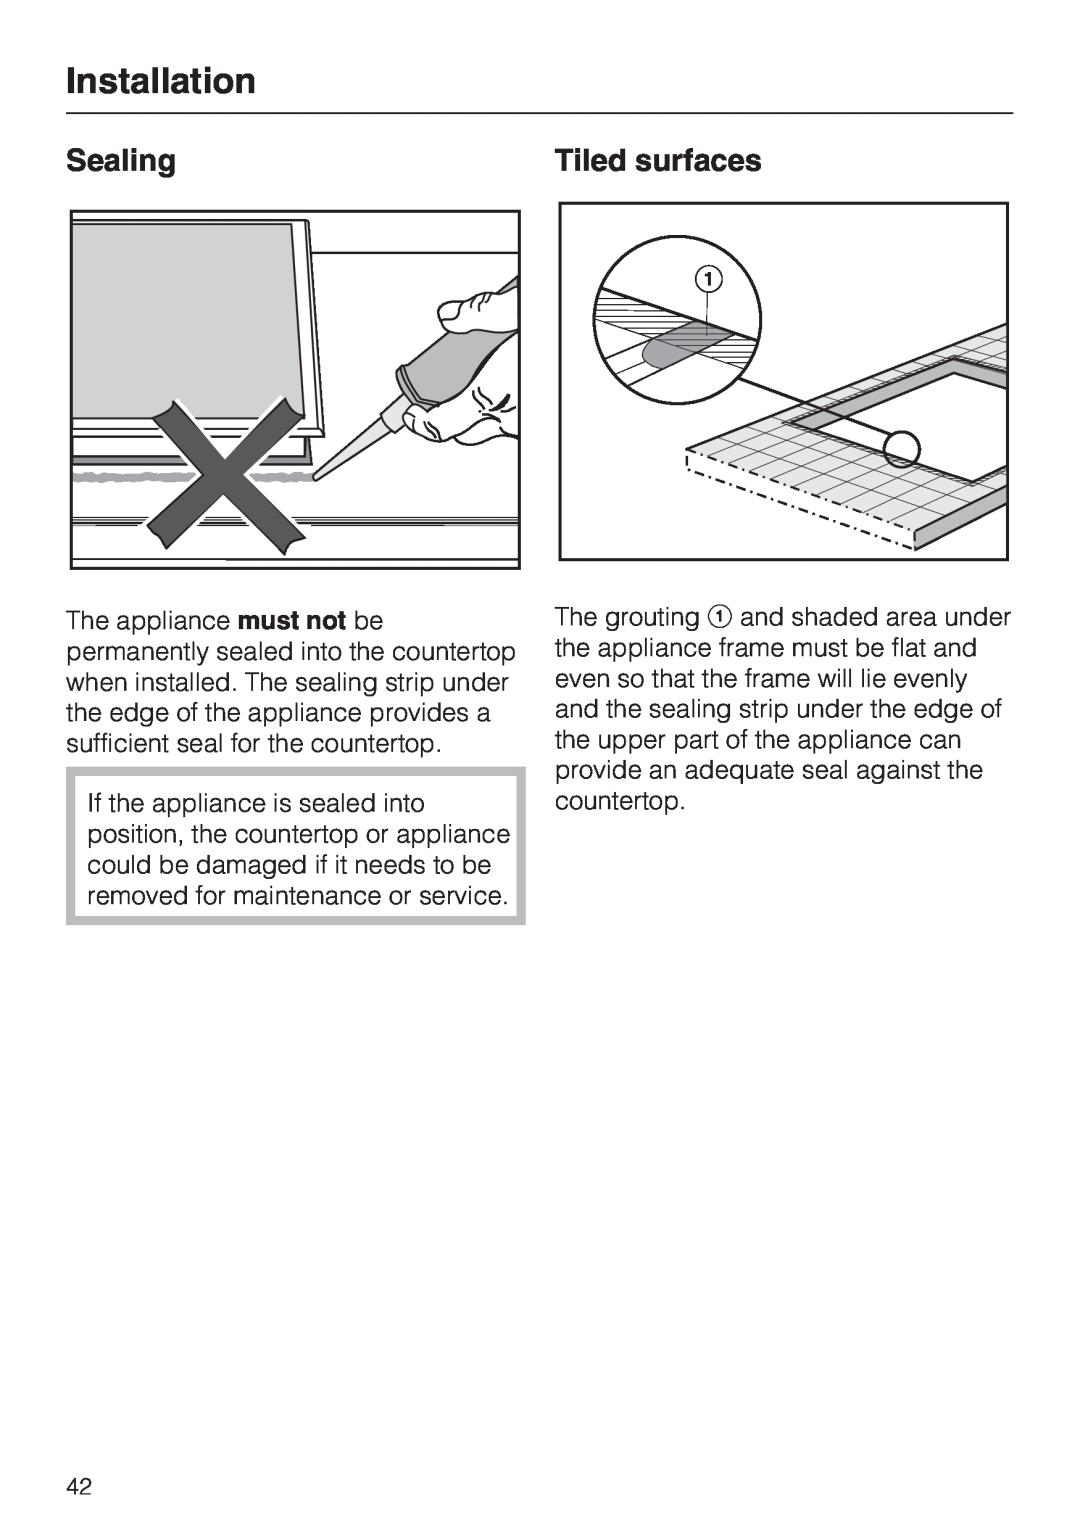 Miele CS 1221 installation instructions Sealing, Tiled surfaces, Installation 